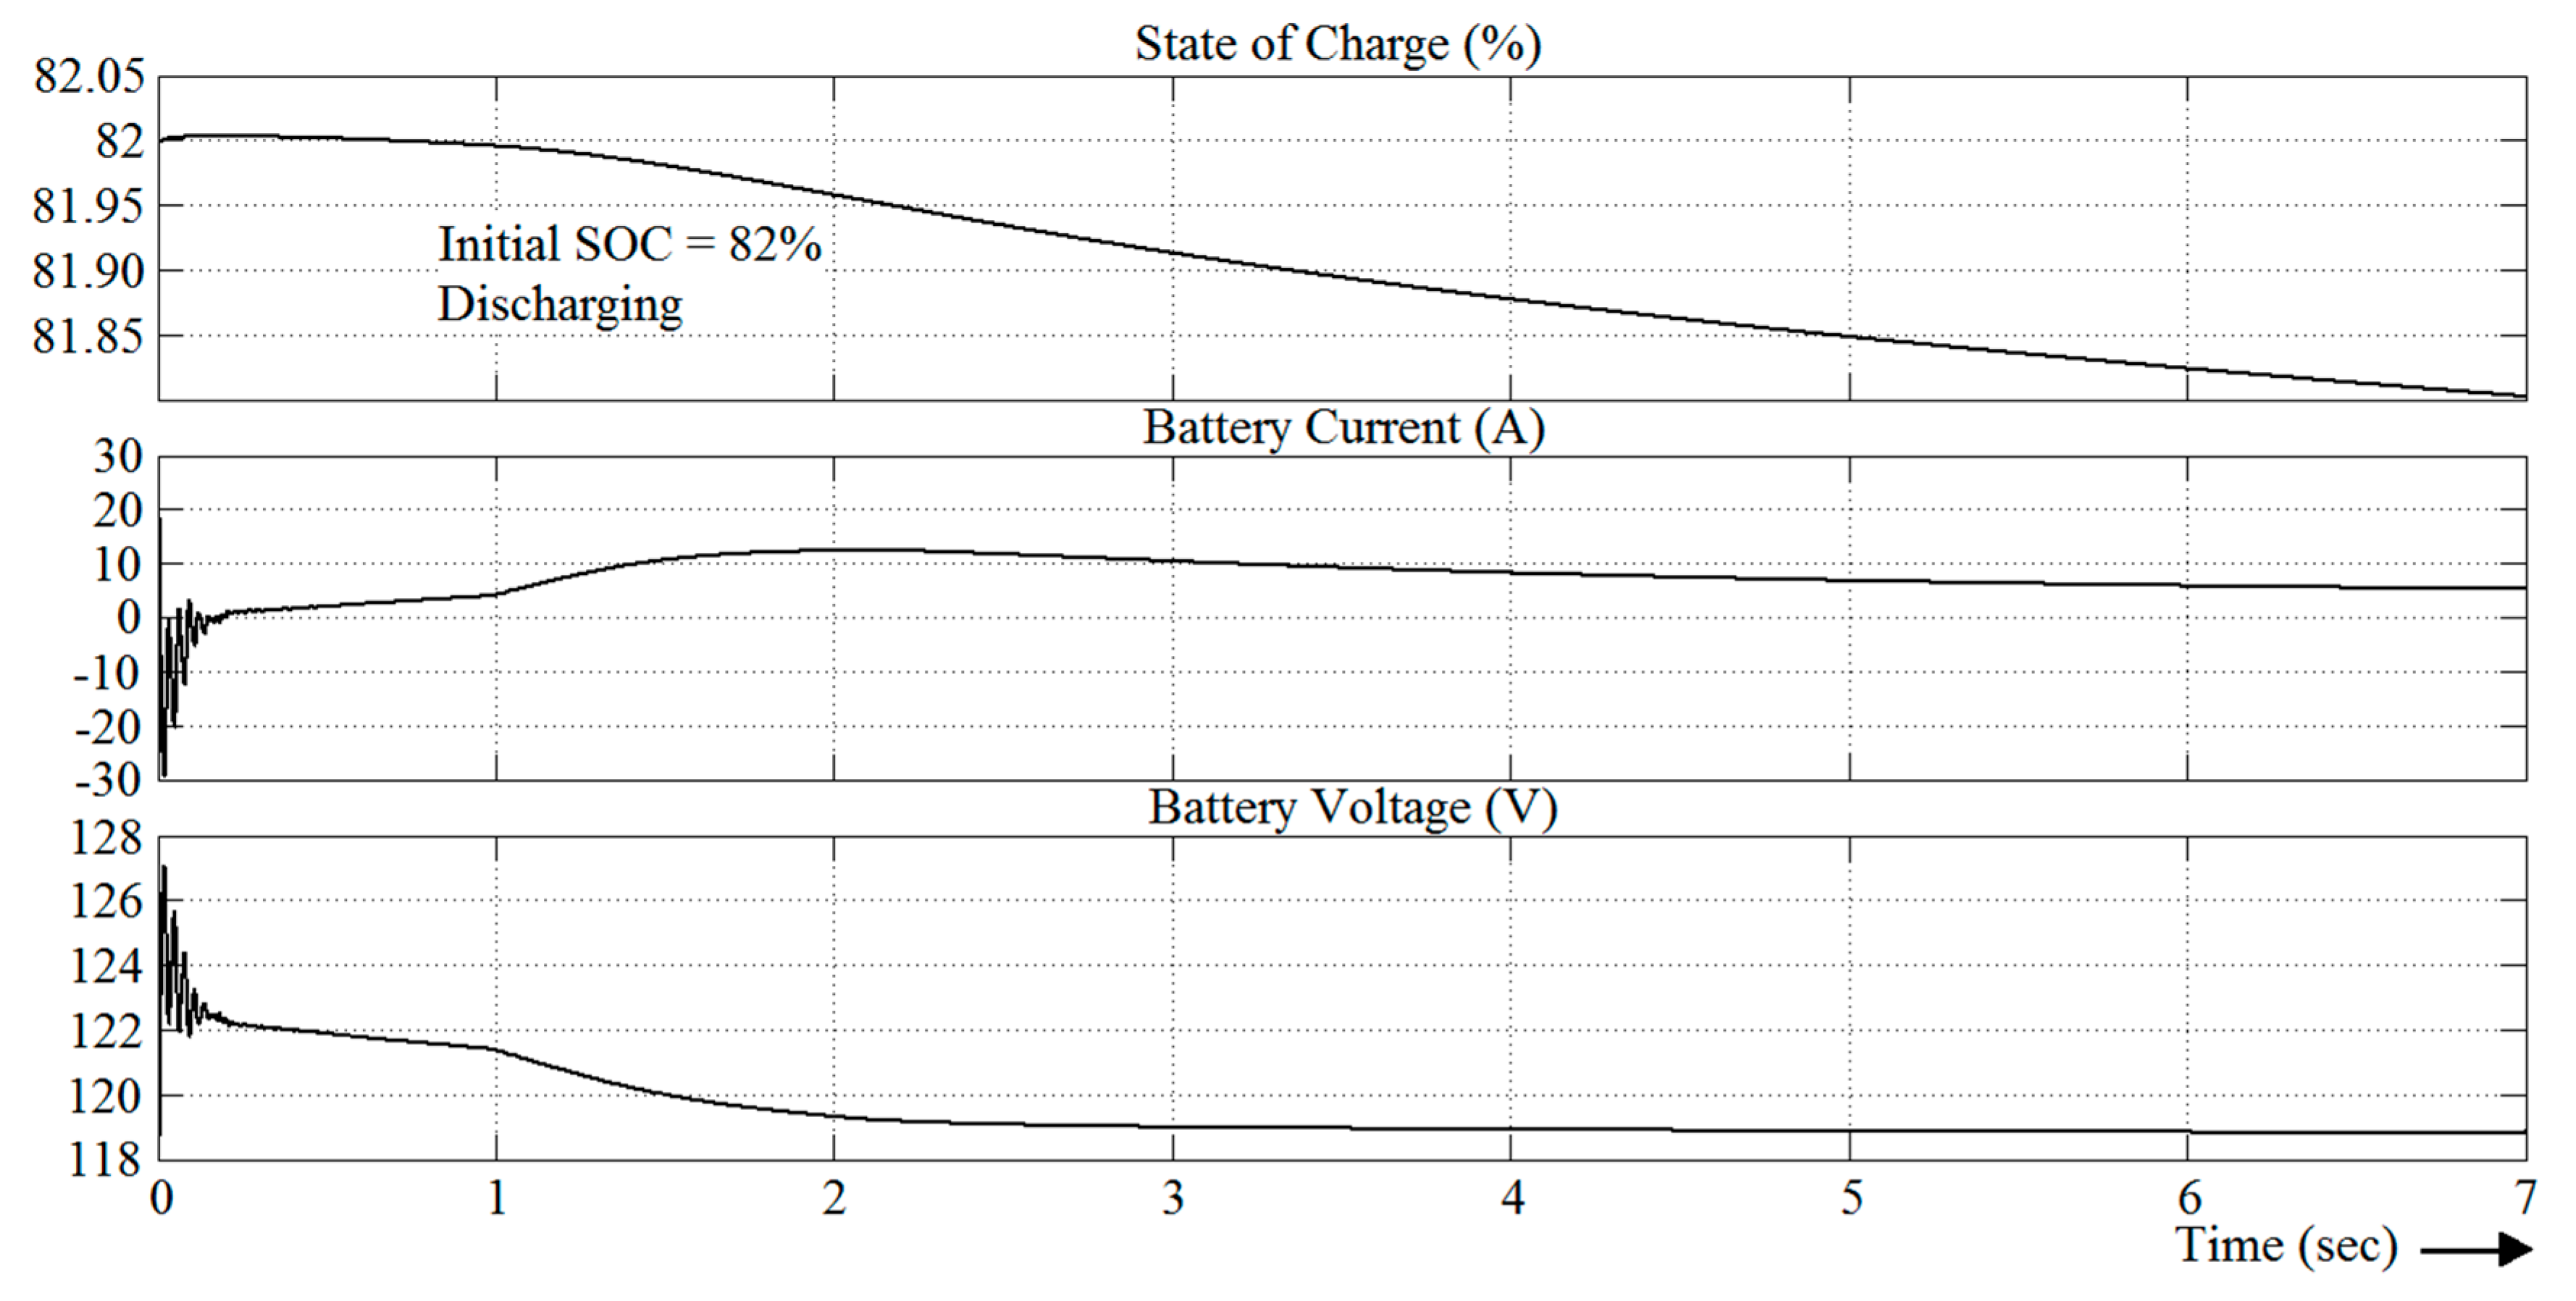 electricity pricing splice 2 dataset download